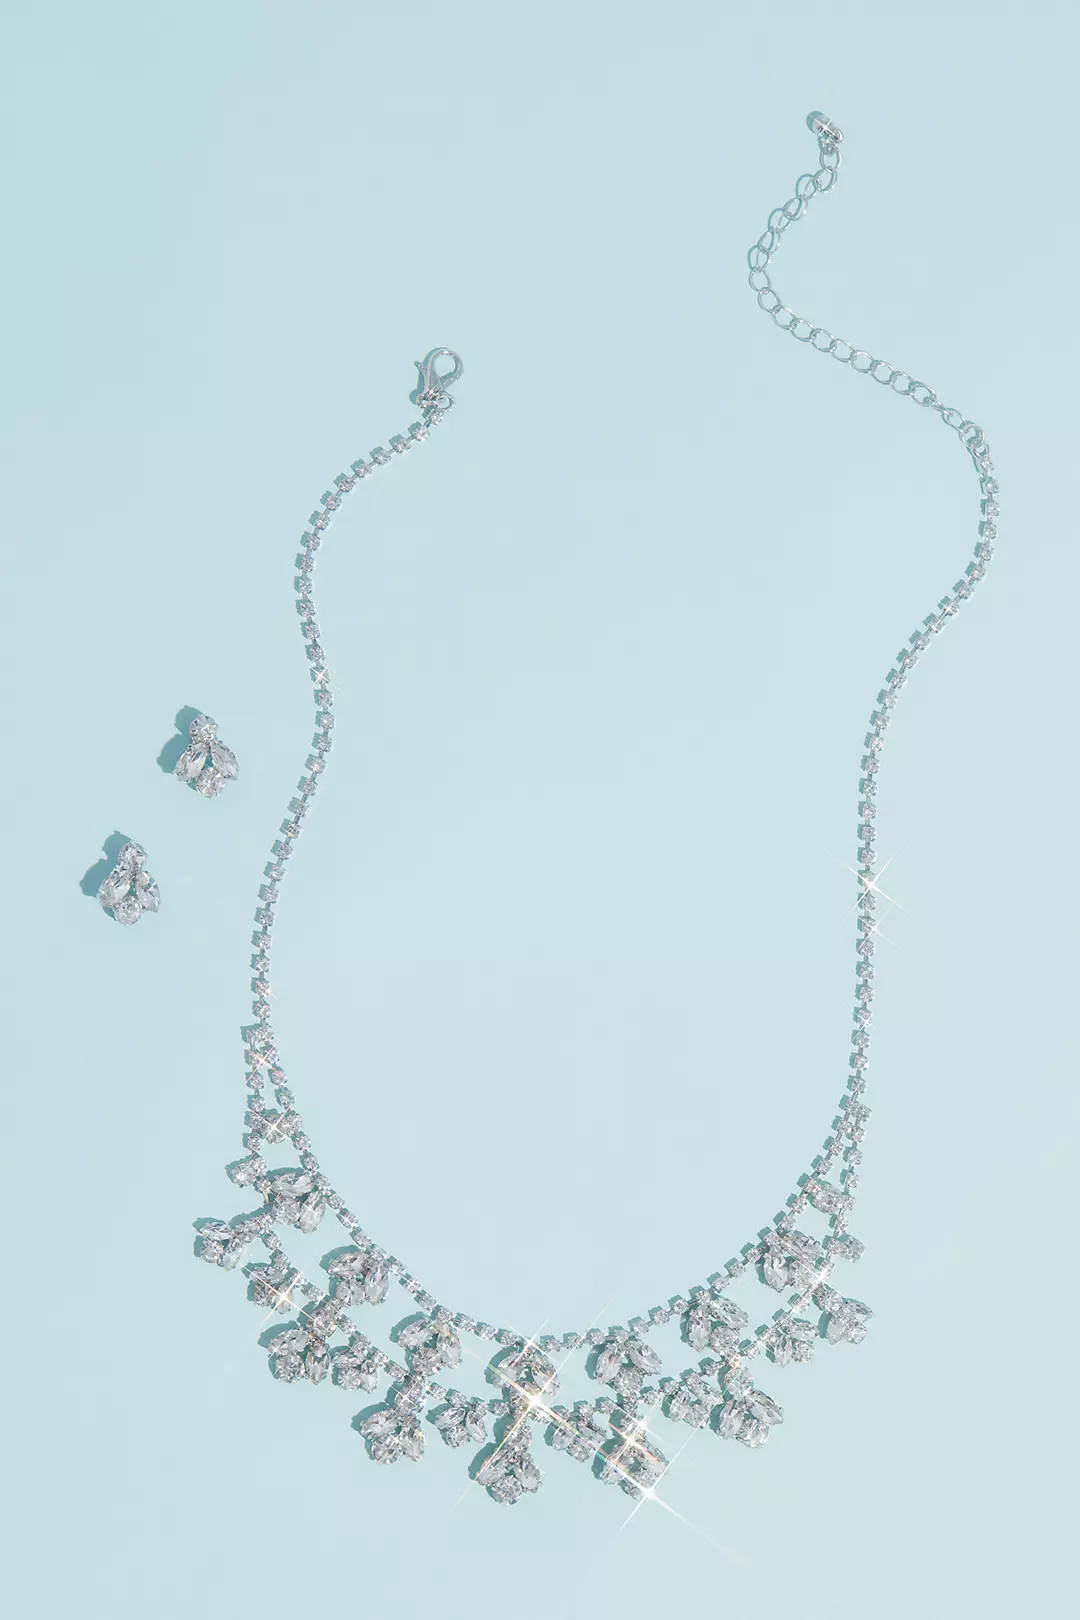 Marquise Crystal Leaf Necklace and Earrings Set Image